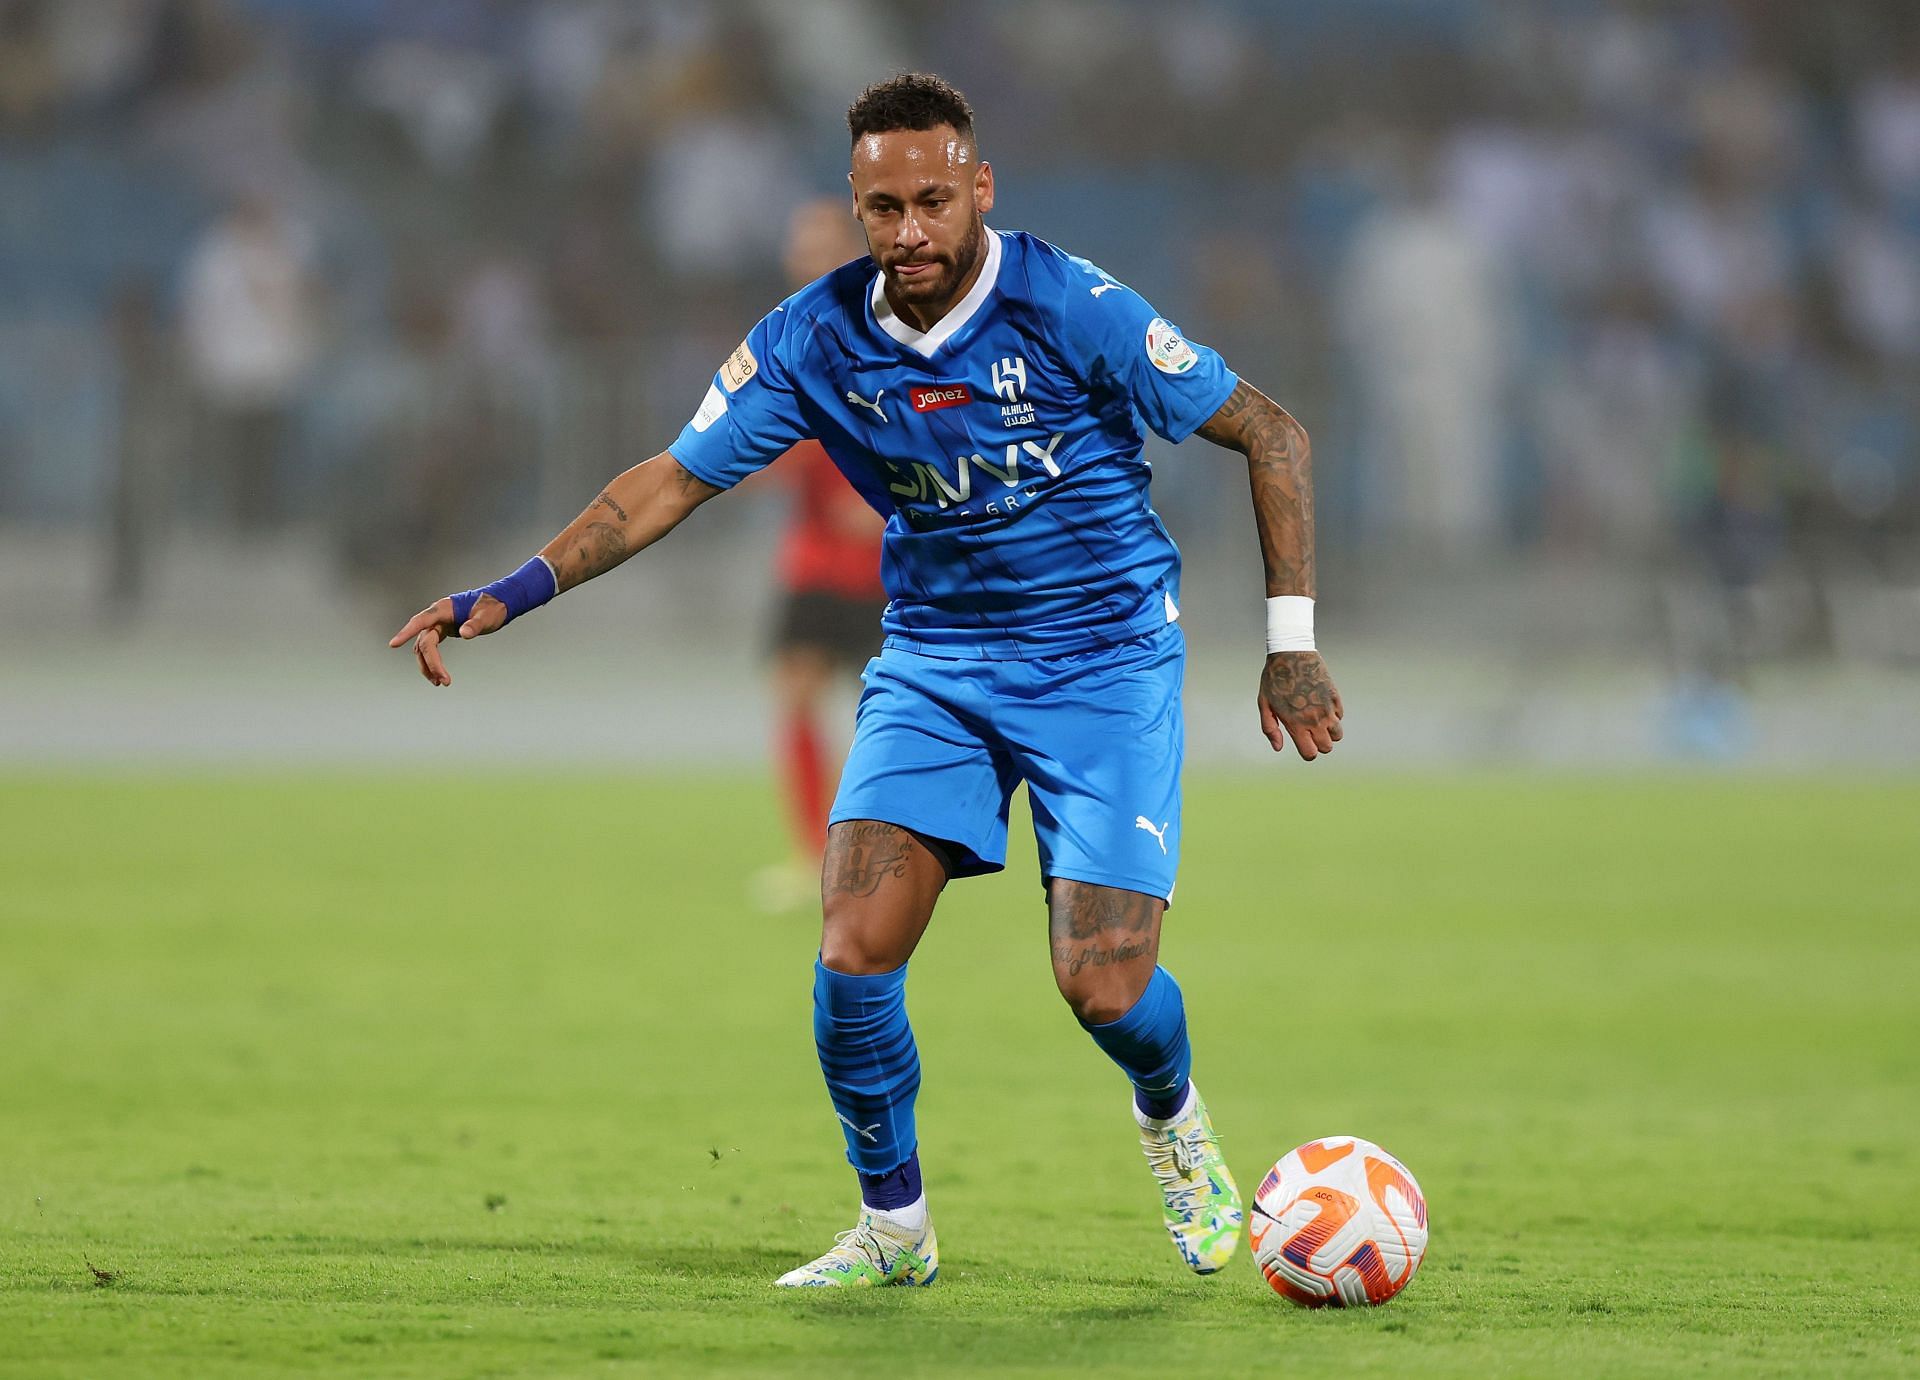 The Brazilian superstar grabbed an assist on his Al-Hilal debut.